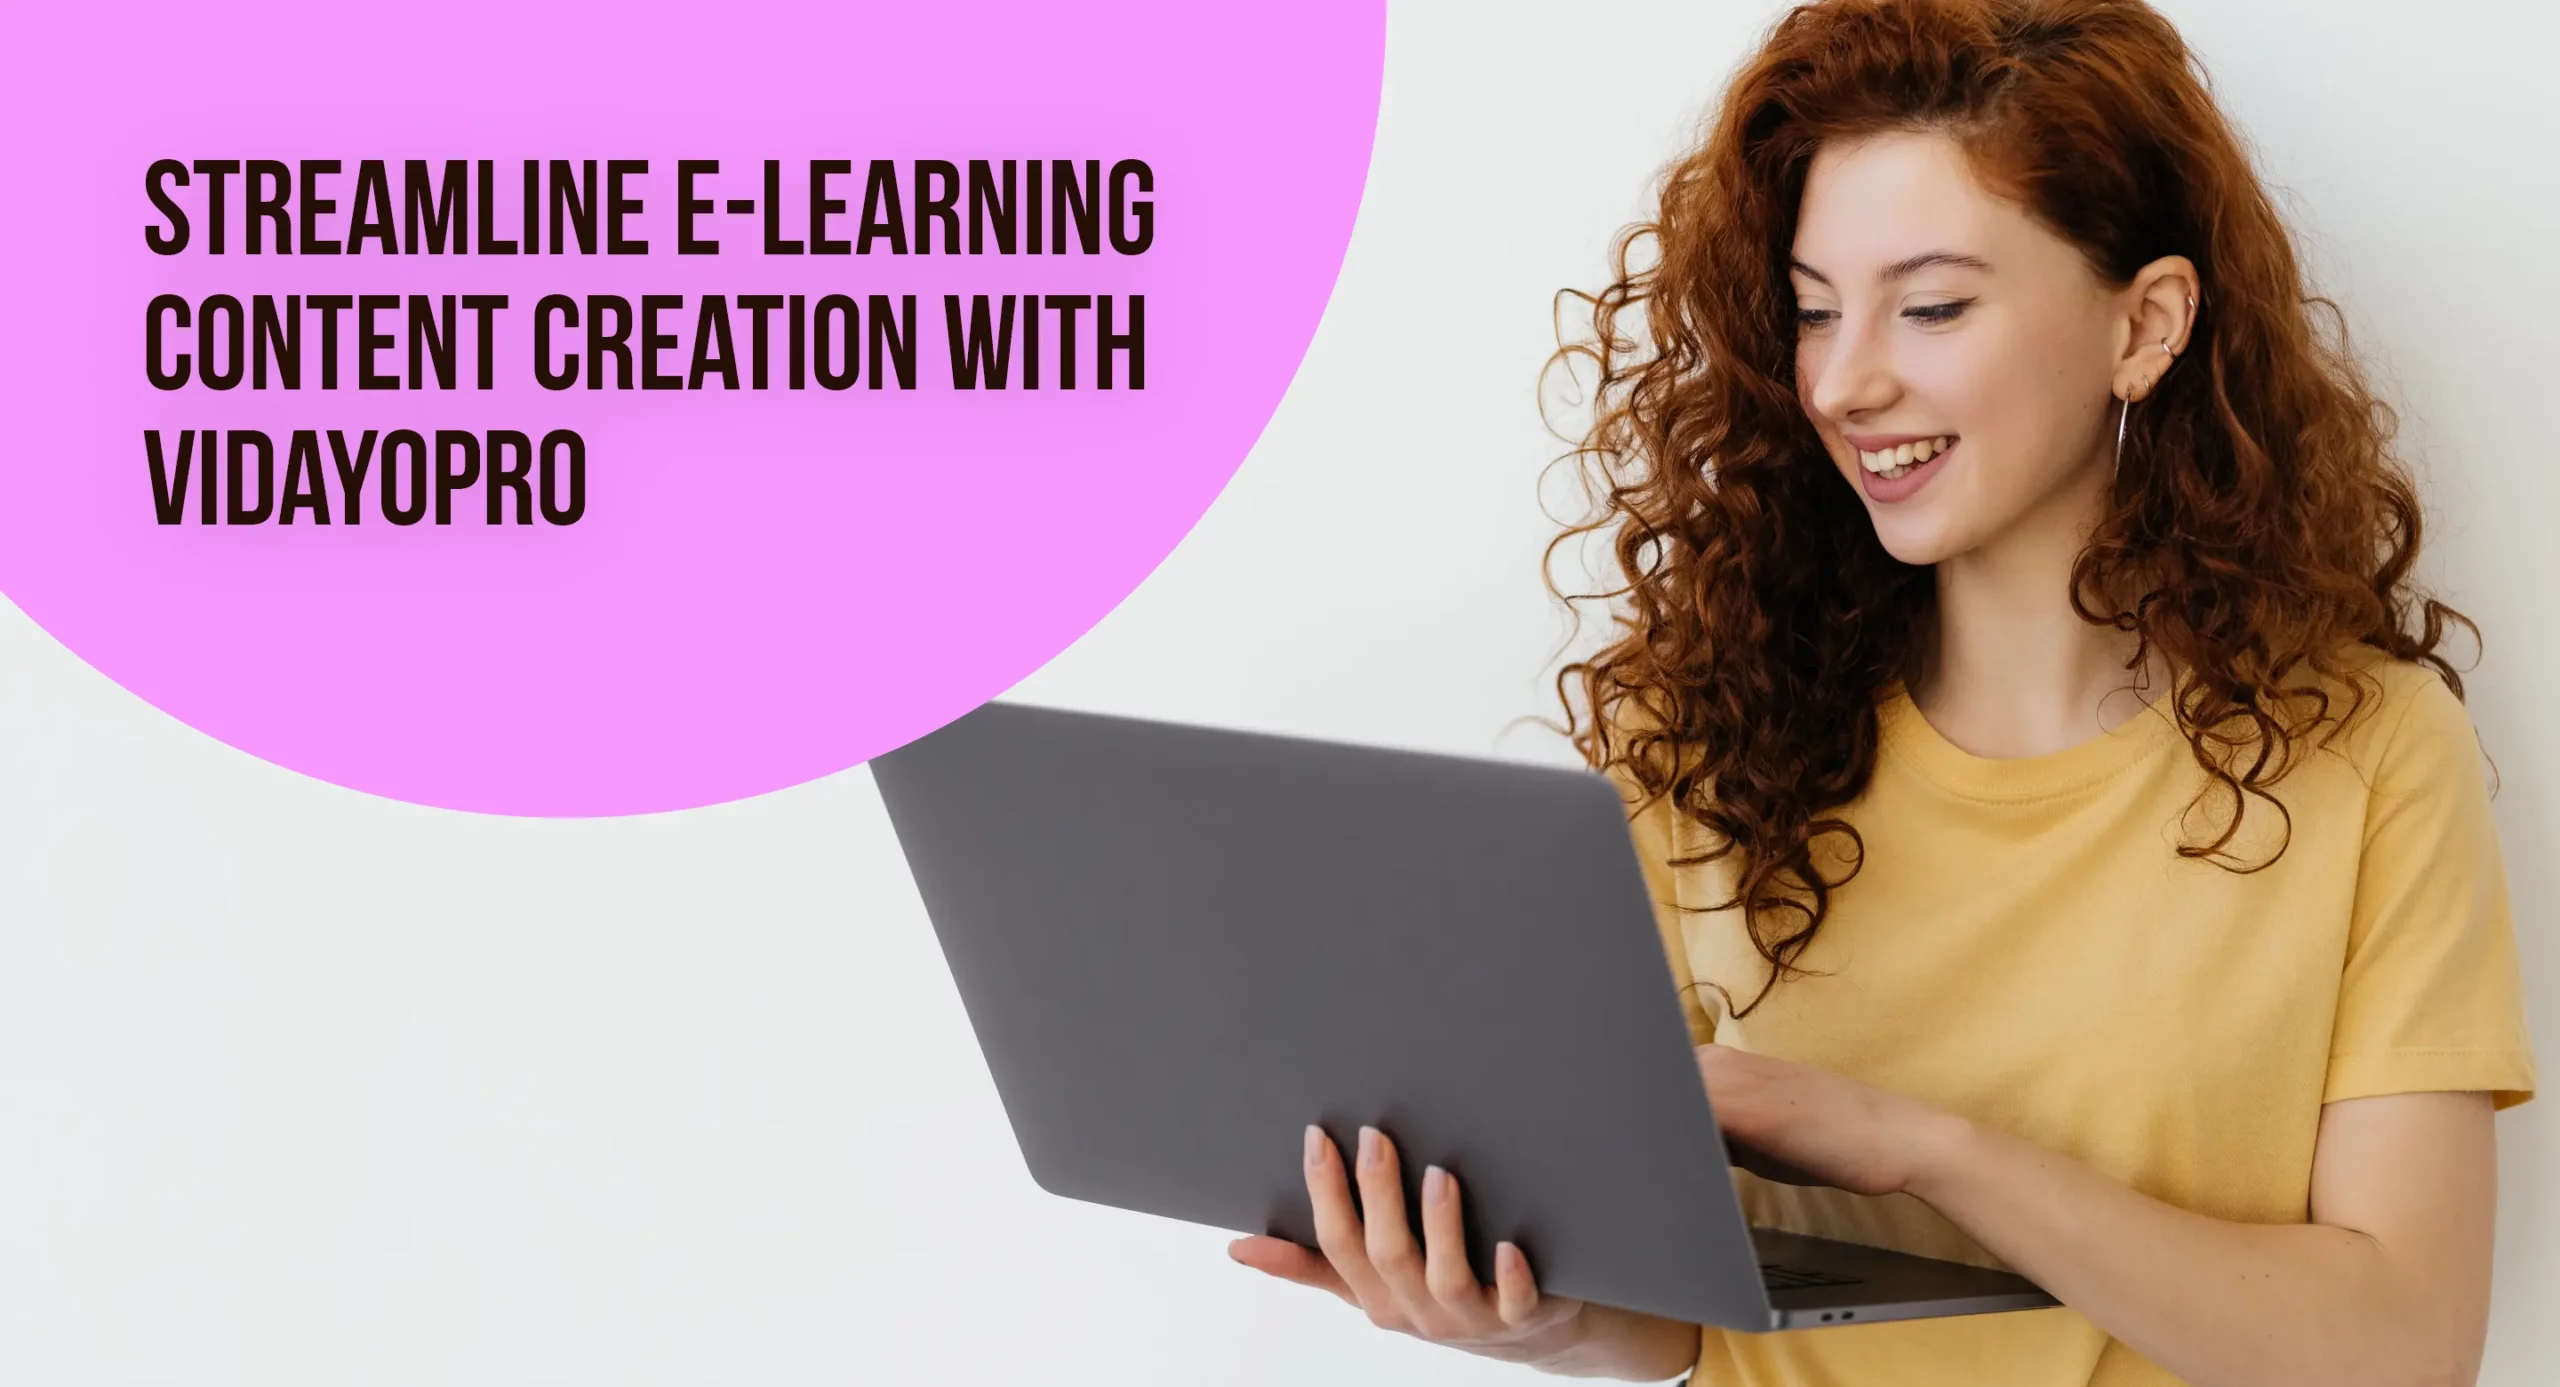 E-Learning Content Creation